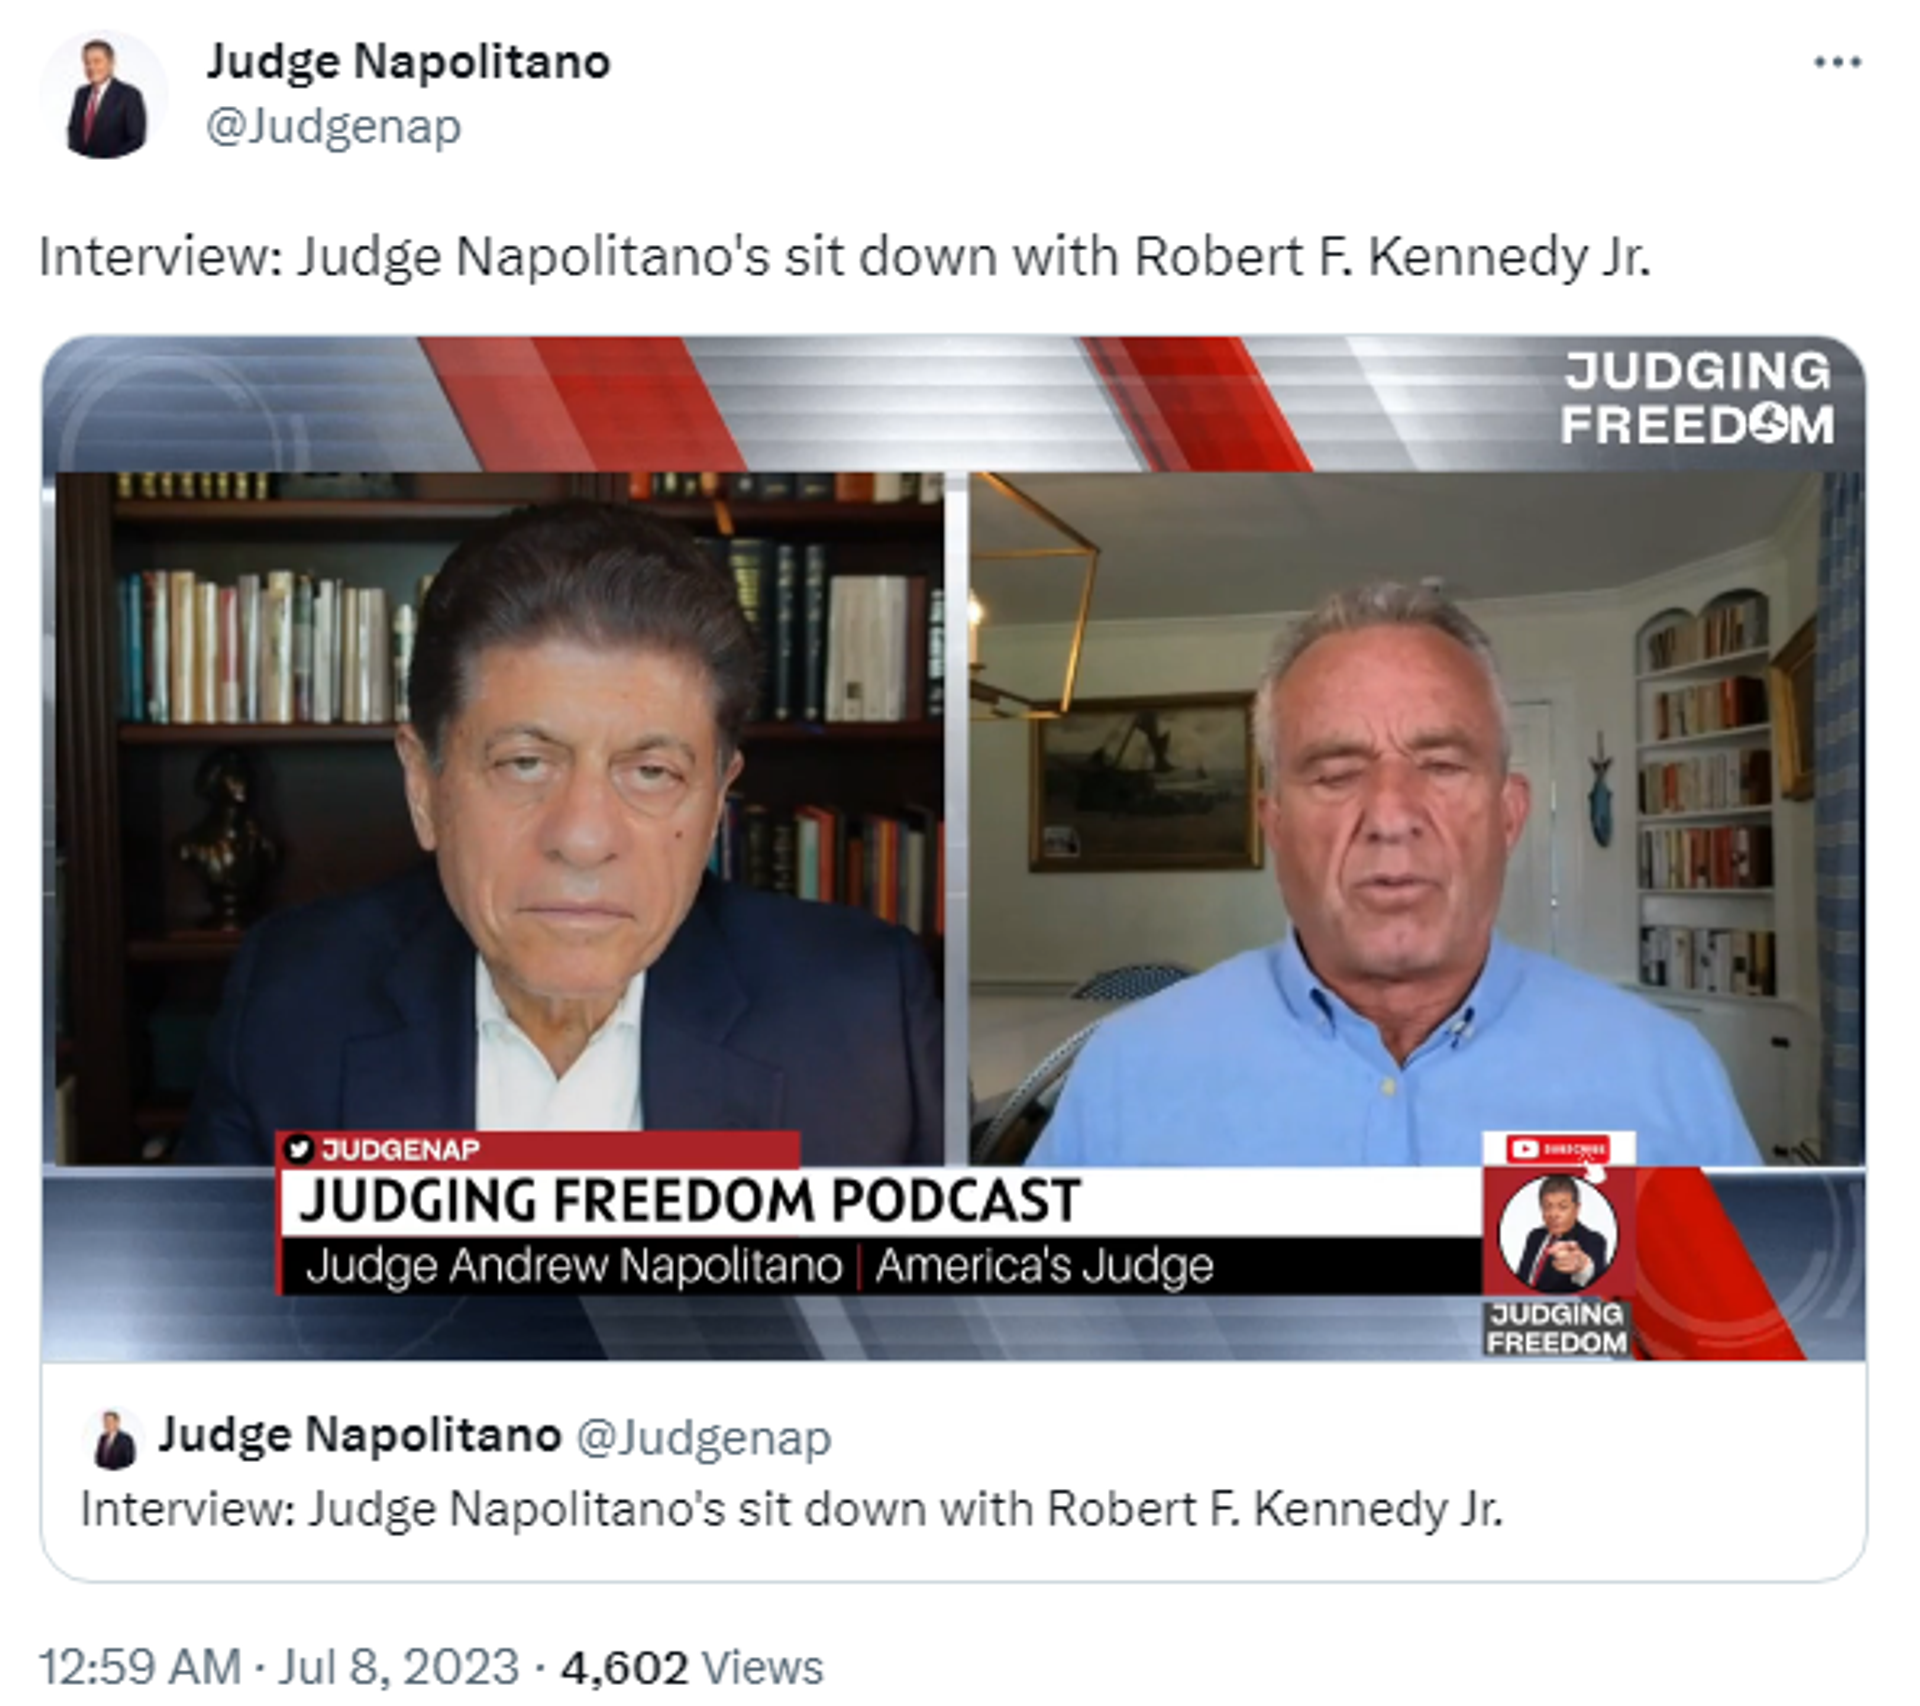 Screenshot of Twitter post by Judge Andrew Napolitano featuring his interview with Robert F. Kennedy Jr., on his Judging Freedom podcast. - Sputnik International, 1920, 08.07.2023